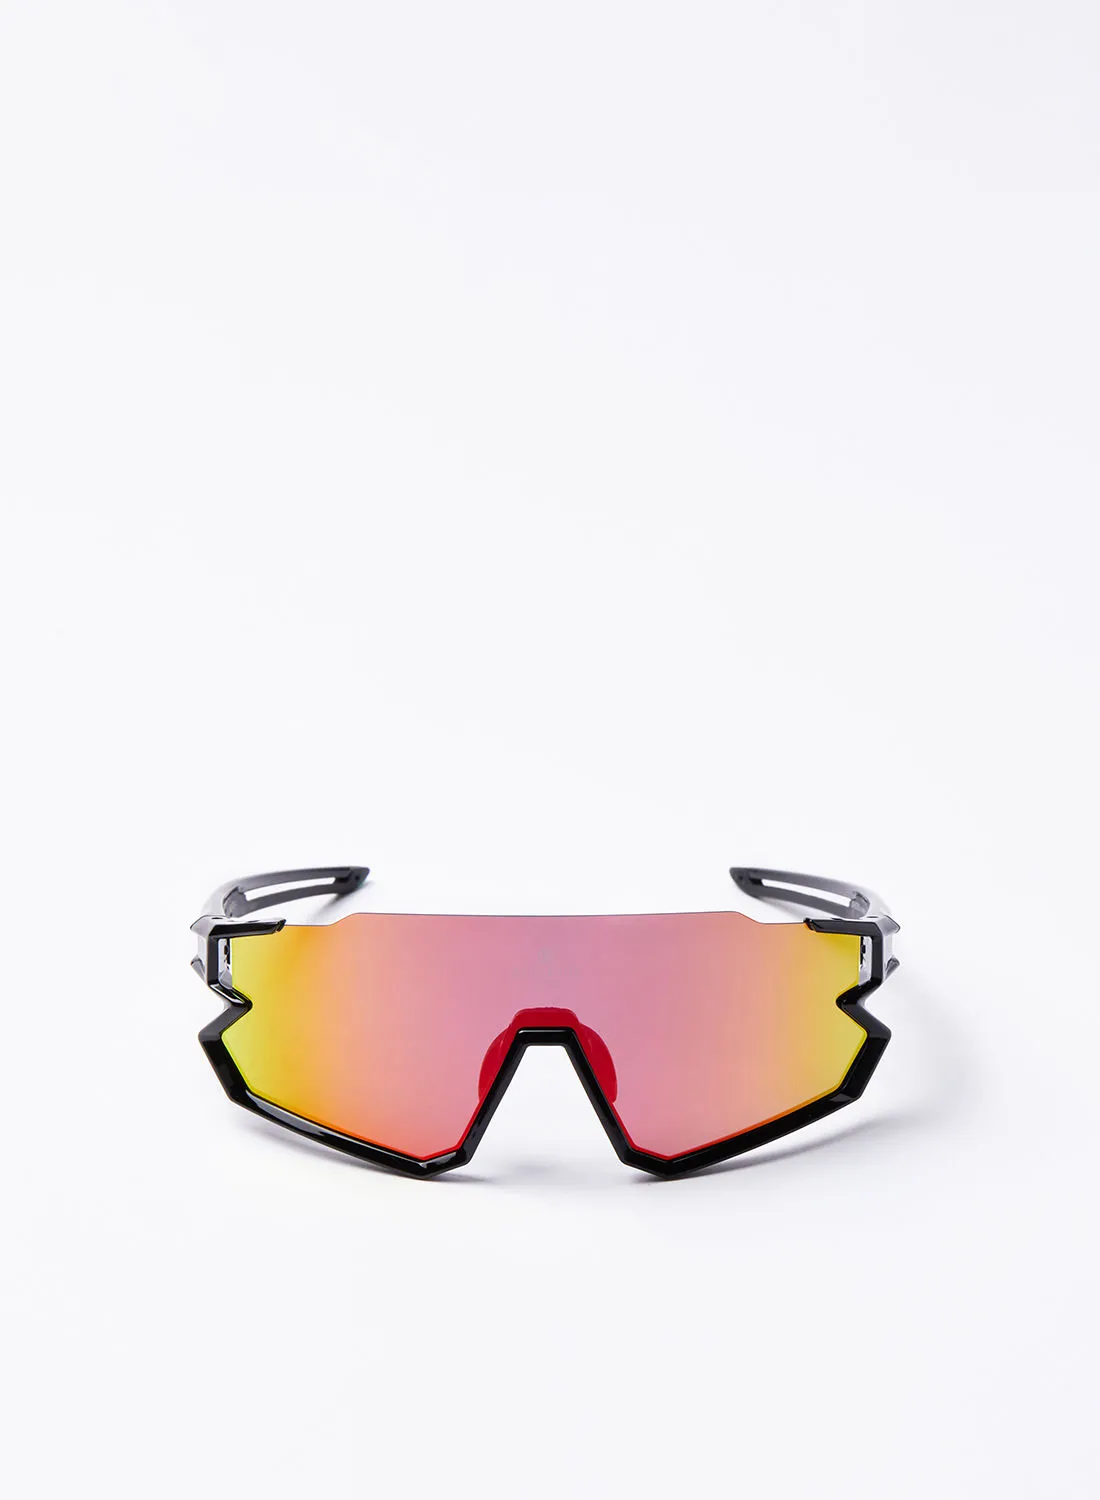 Athletiq Cycling Scooter Sunglasses - Athletiq Club Jebel Jais - Black Frame With Red Fire Multilayer Lens